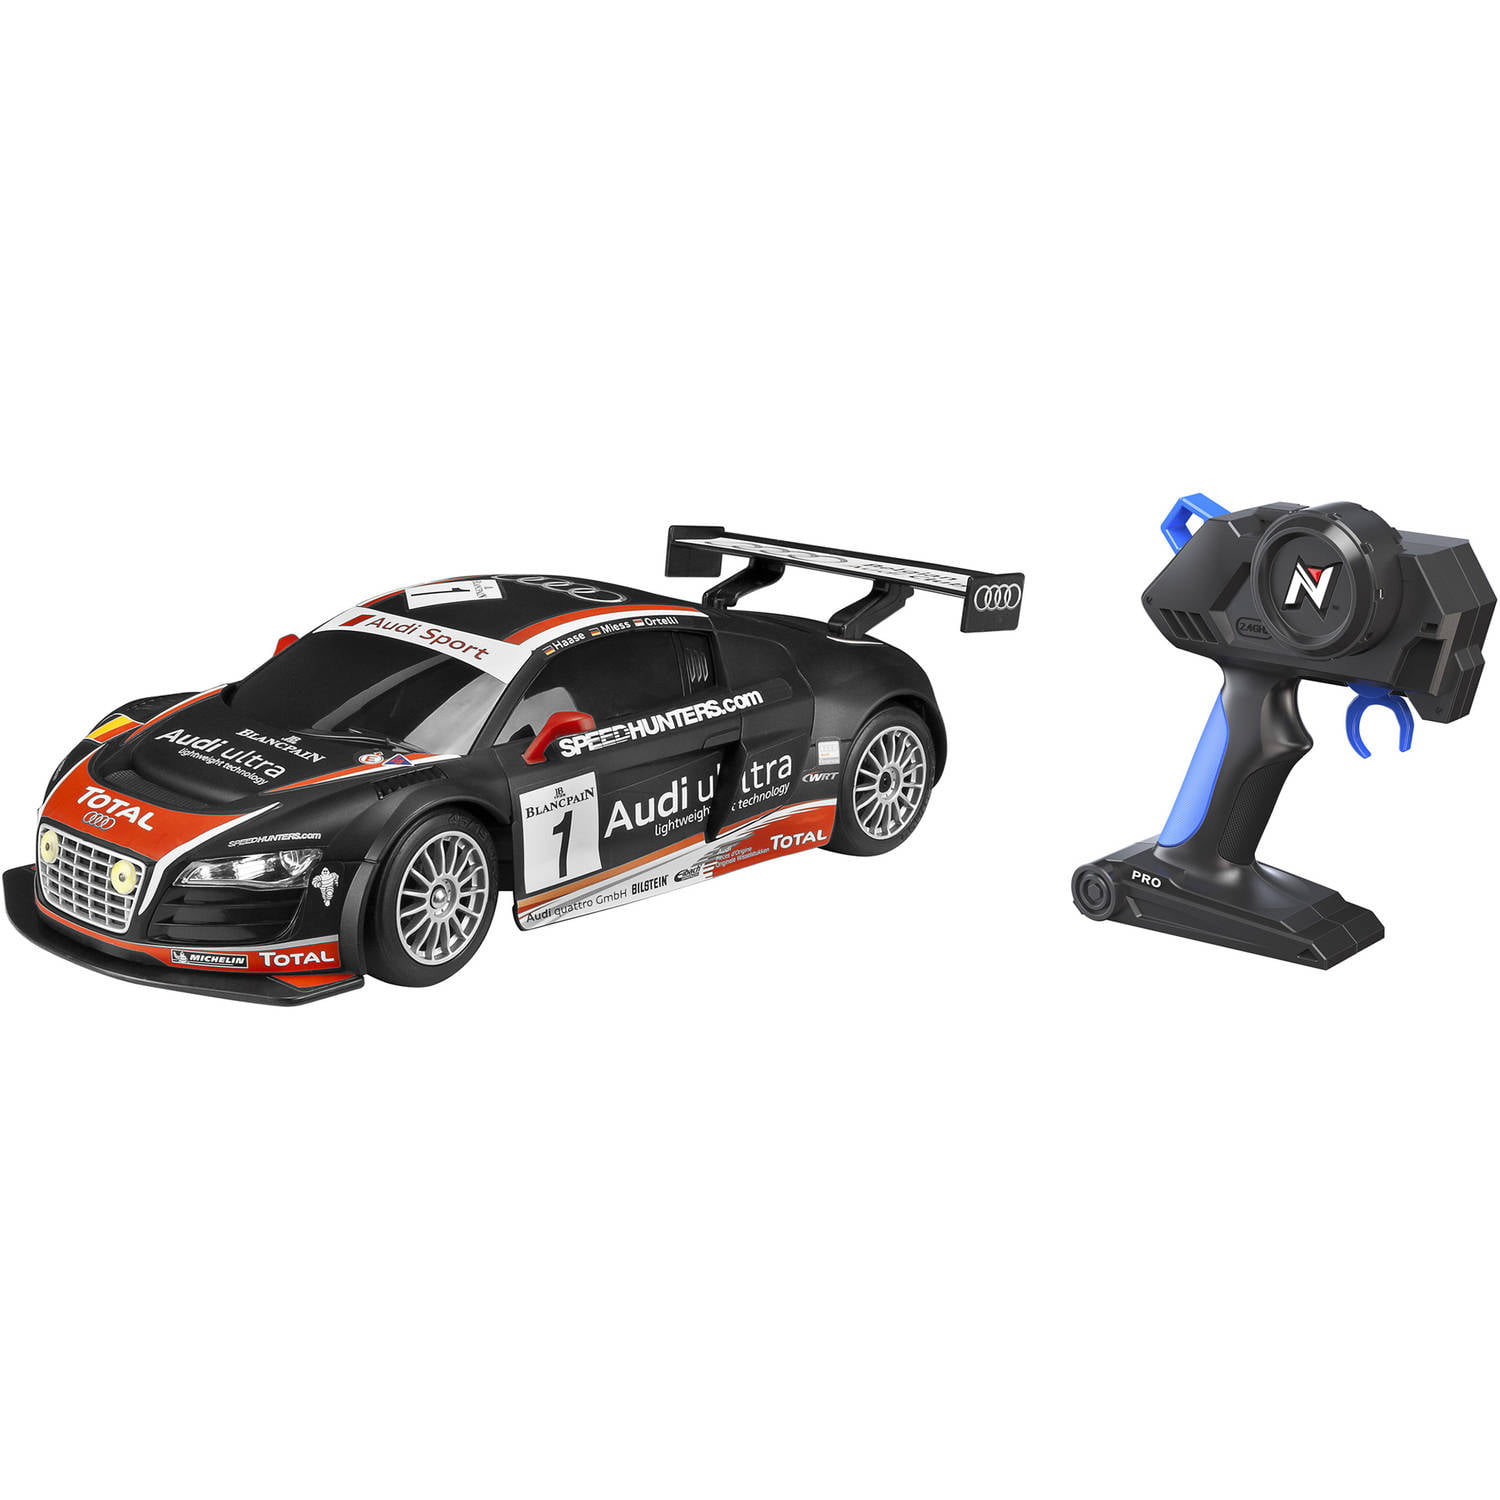 SILVER 1:16 LARGE AUDI R8 LMS RECHARGEABLE Radio Remote Control Car FAST SPEED 